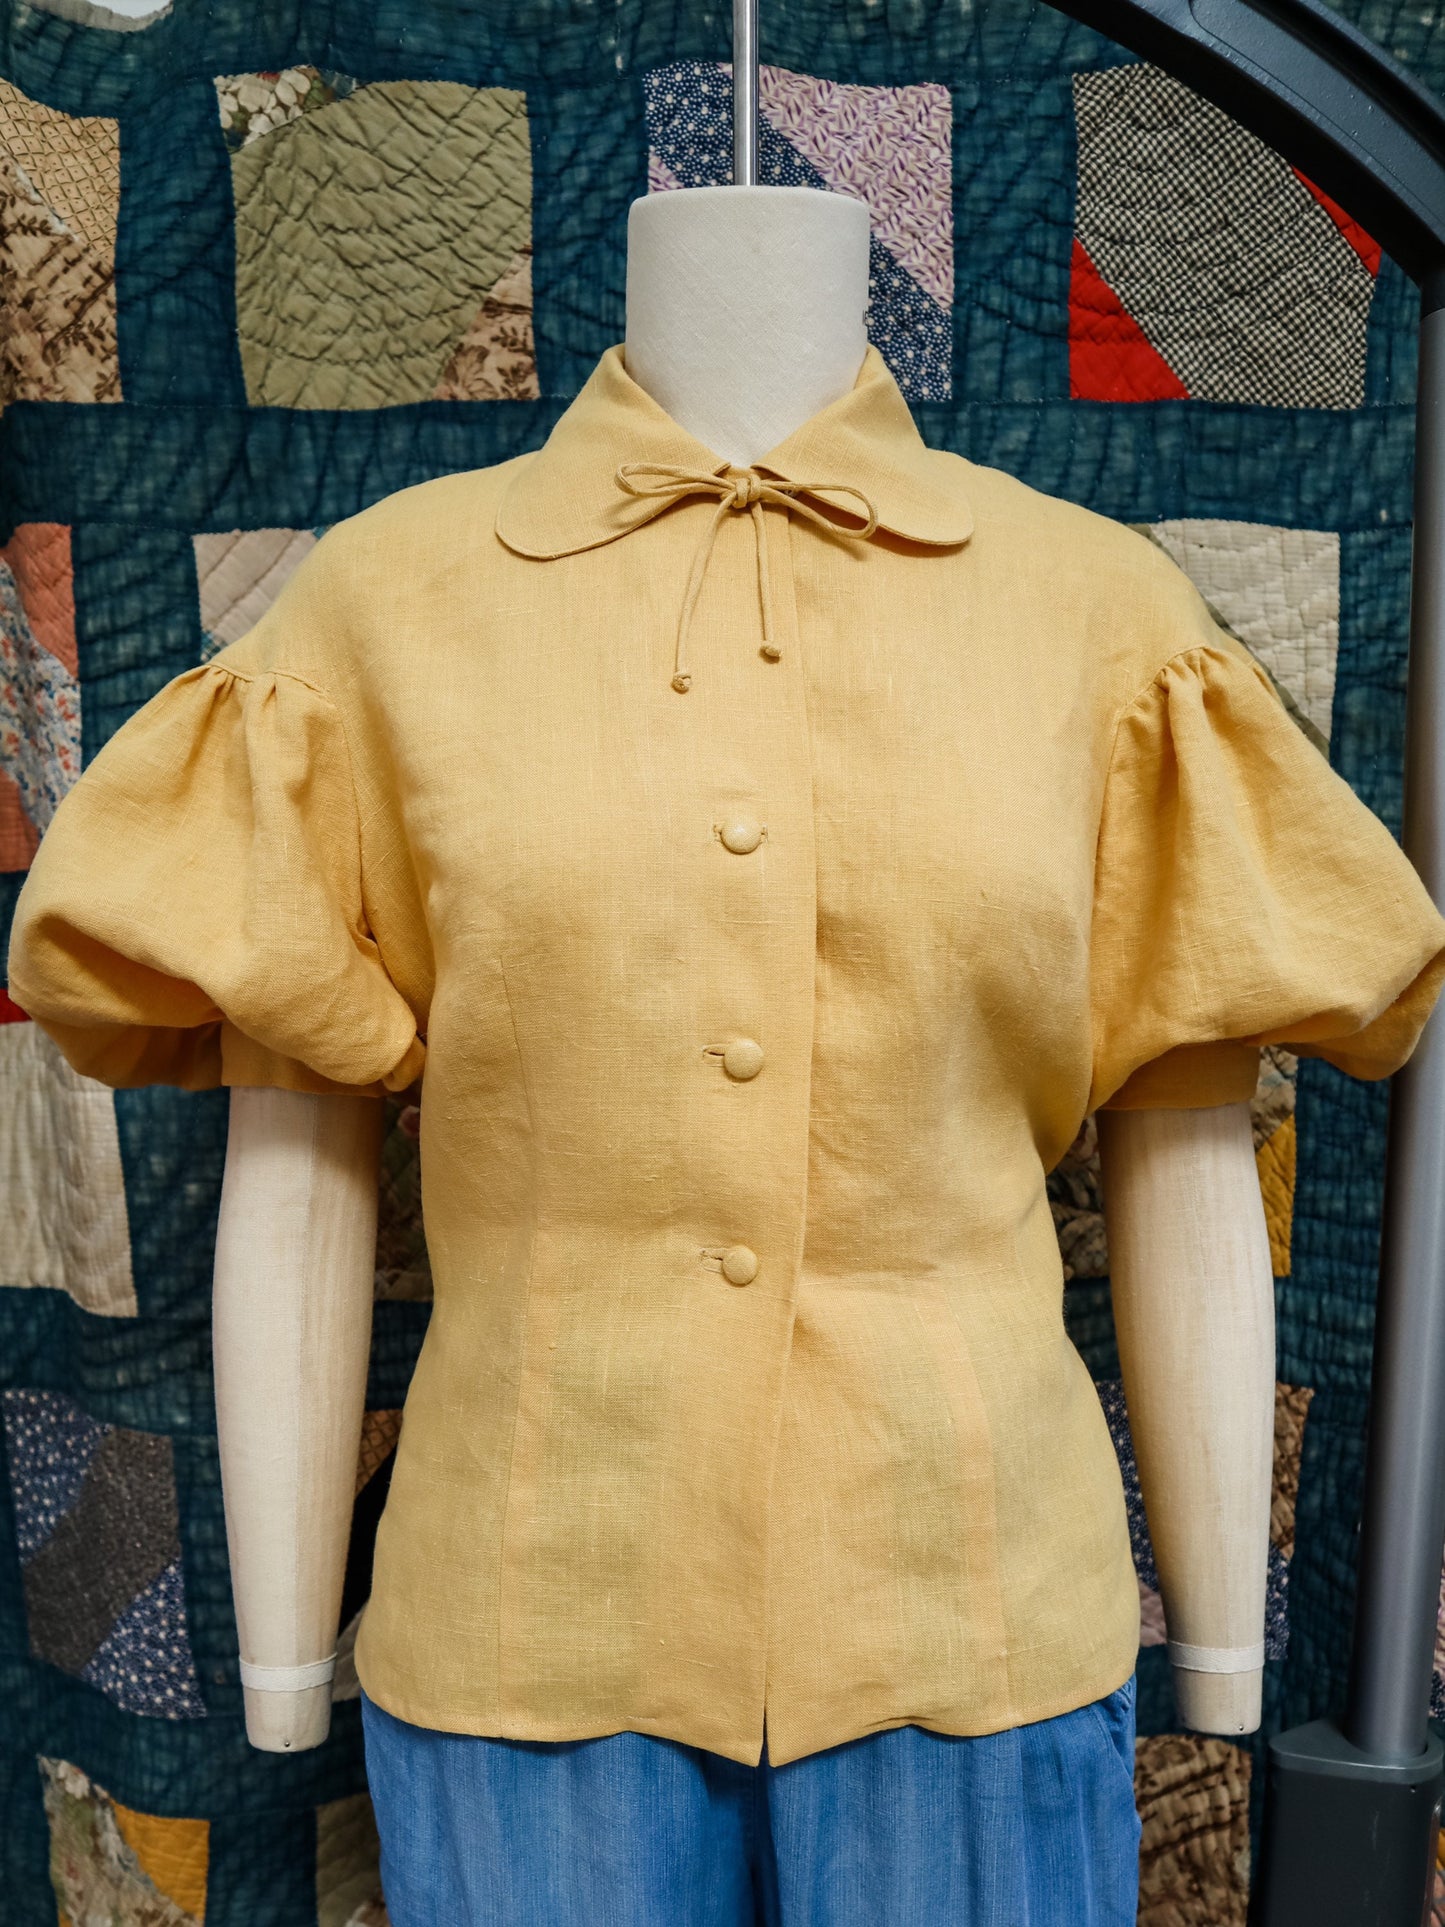 PRINTED PATTERN- 1950s "Harriet" Drop Shoulder Blouse Pattern- Sizes 32-48" Bust Wearing History Shirt Puff Sleeve Collar